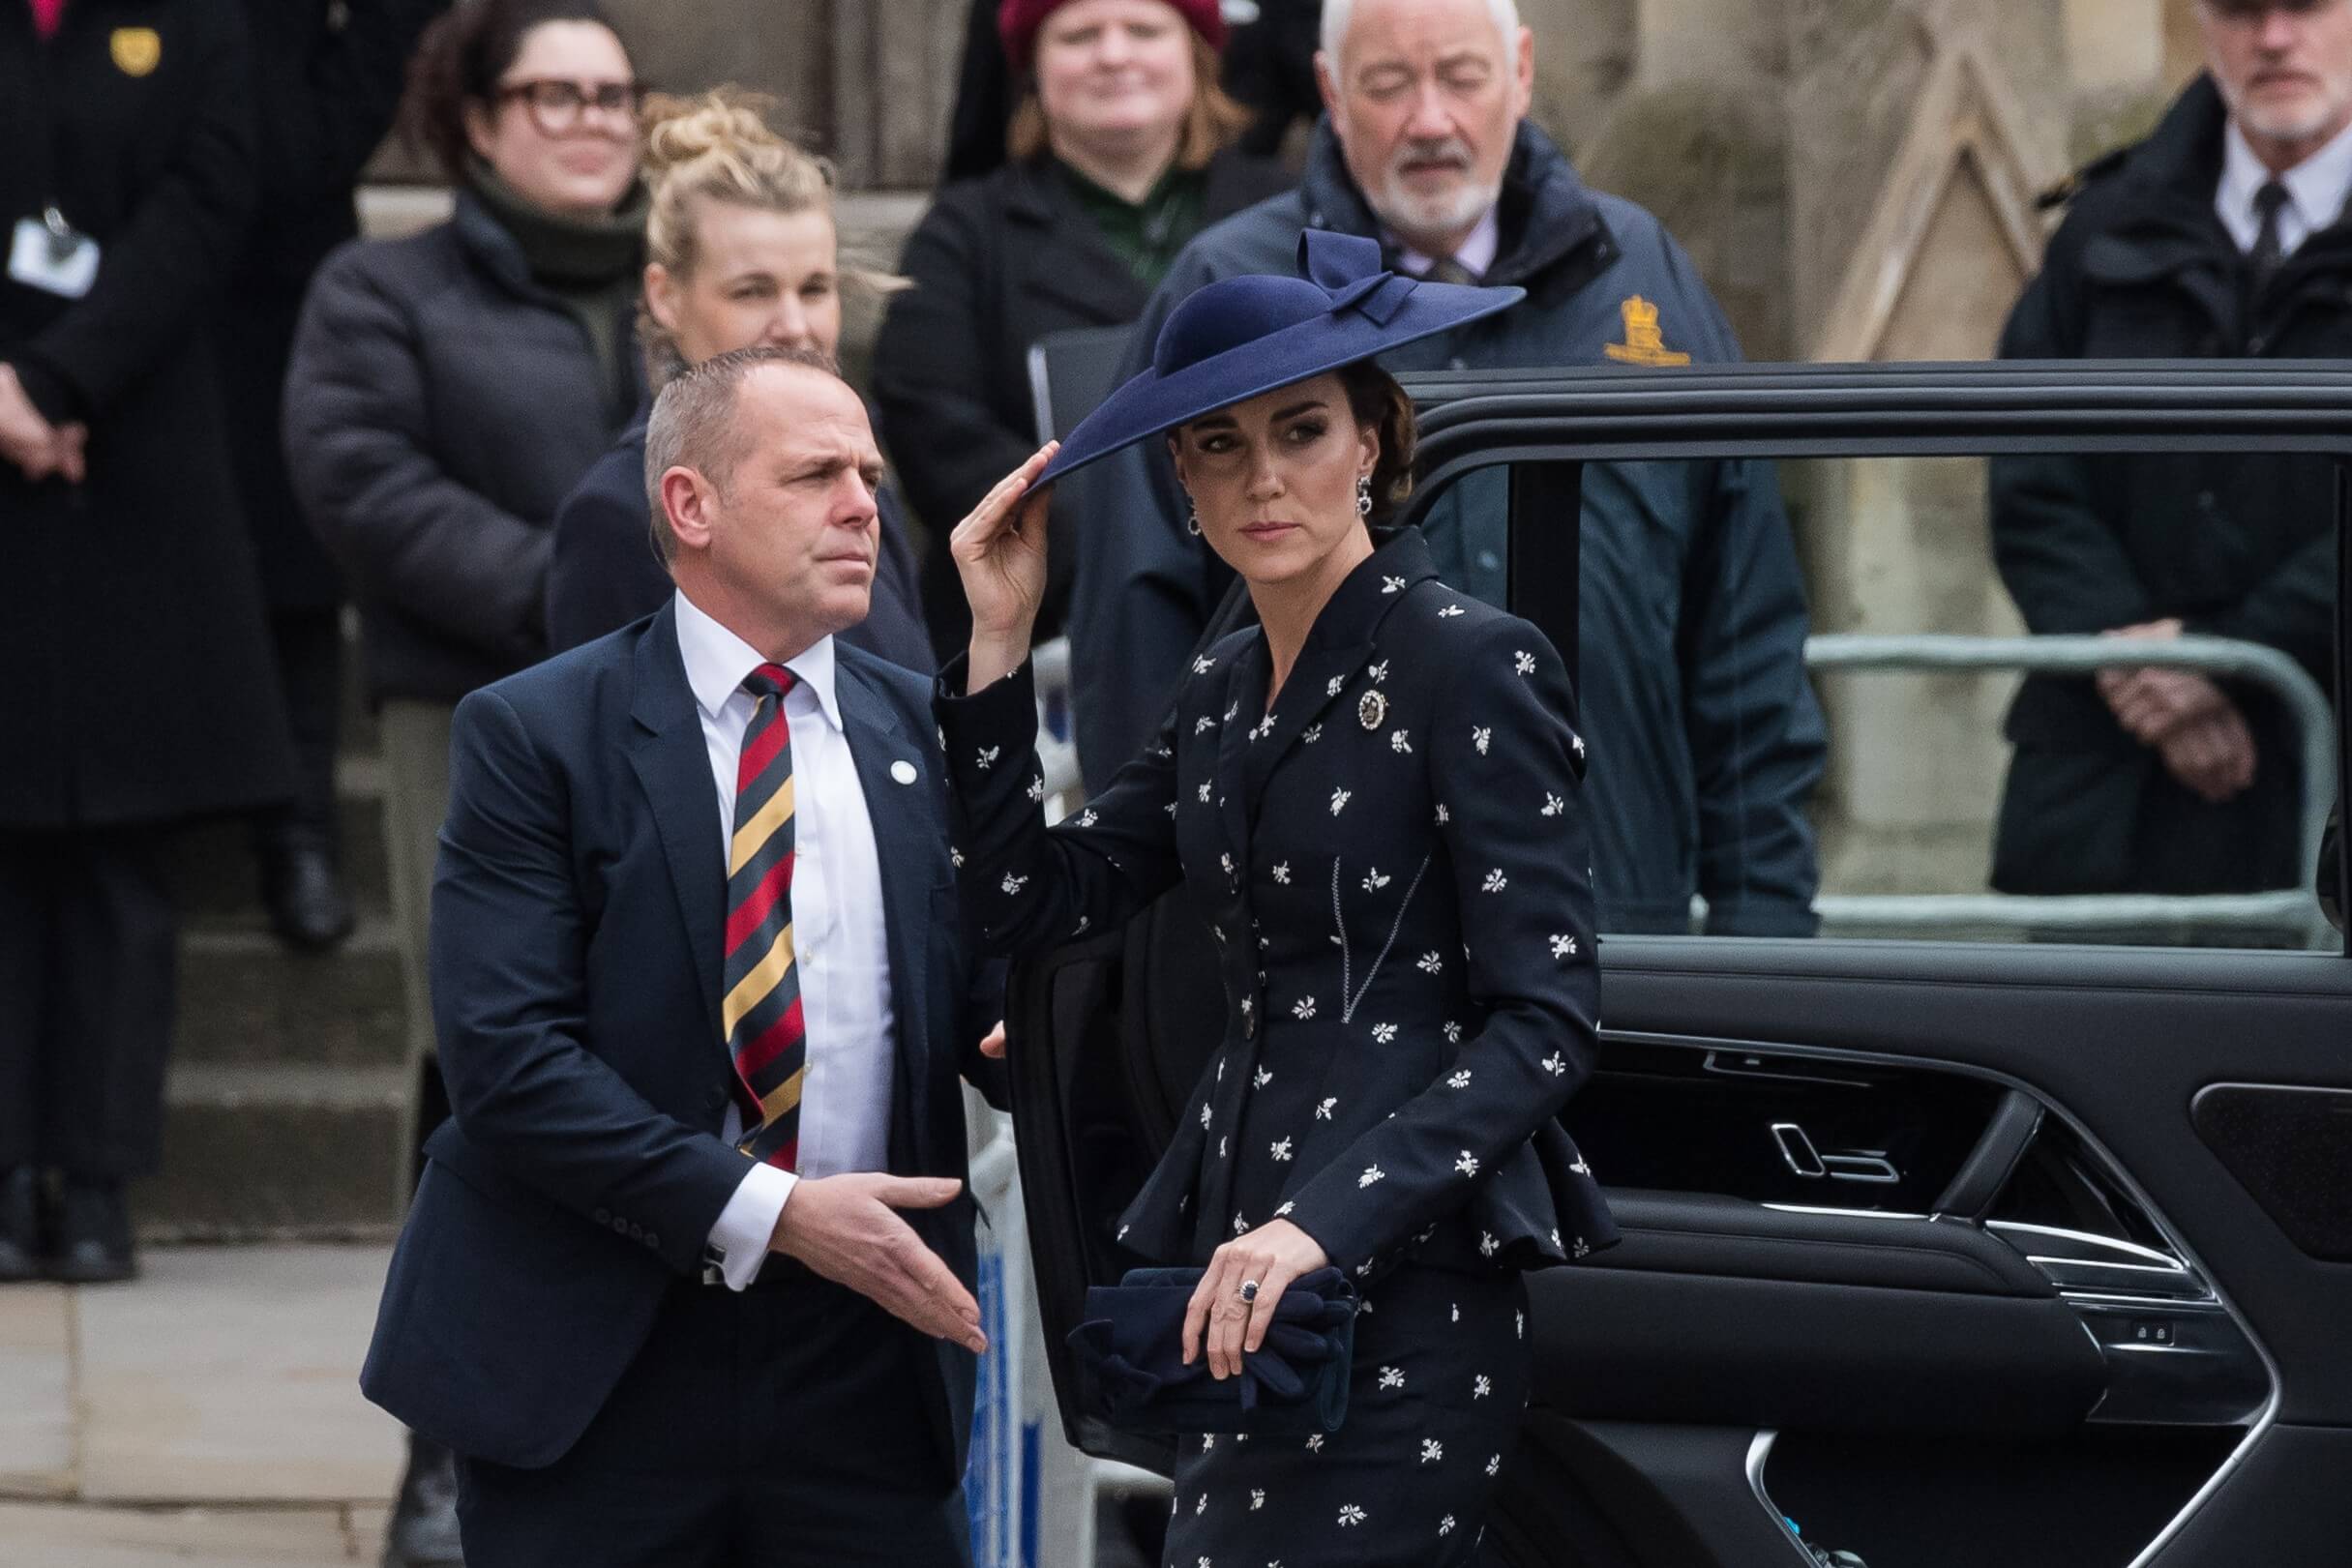 Kate Middleton wears a navy suit with a white floral pattern during the Commonwealth Day service.